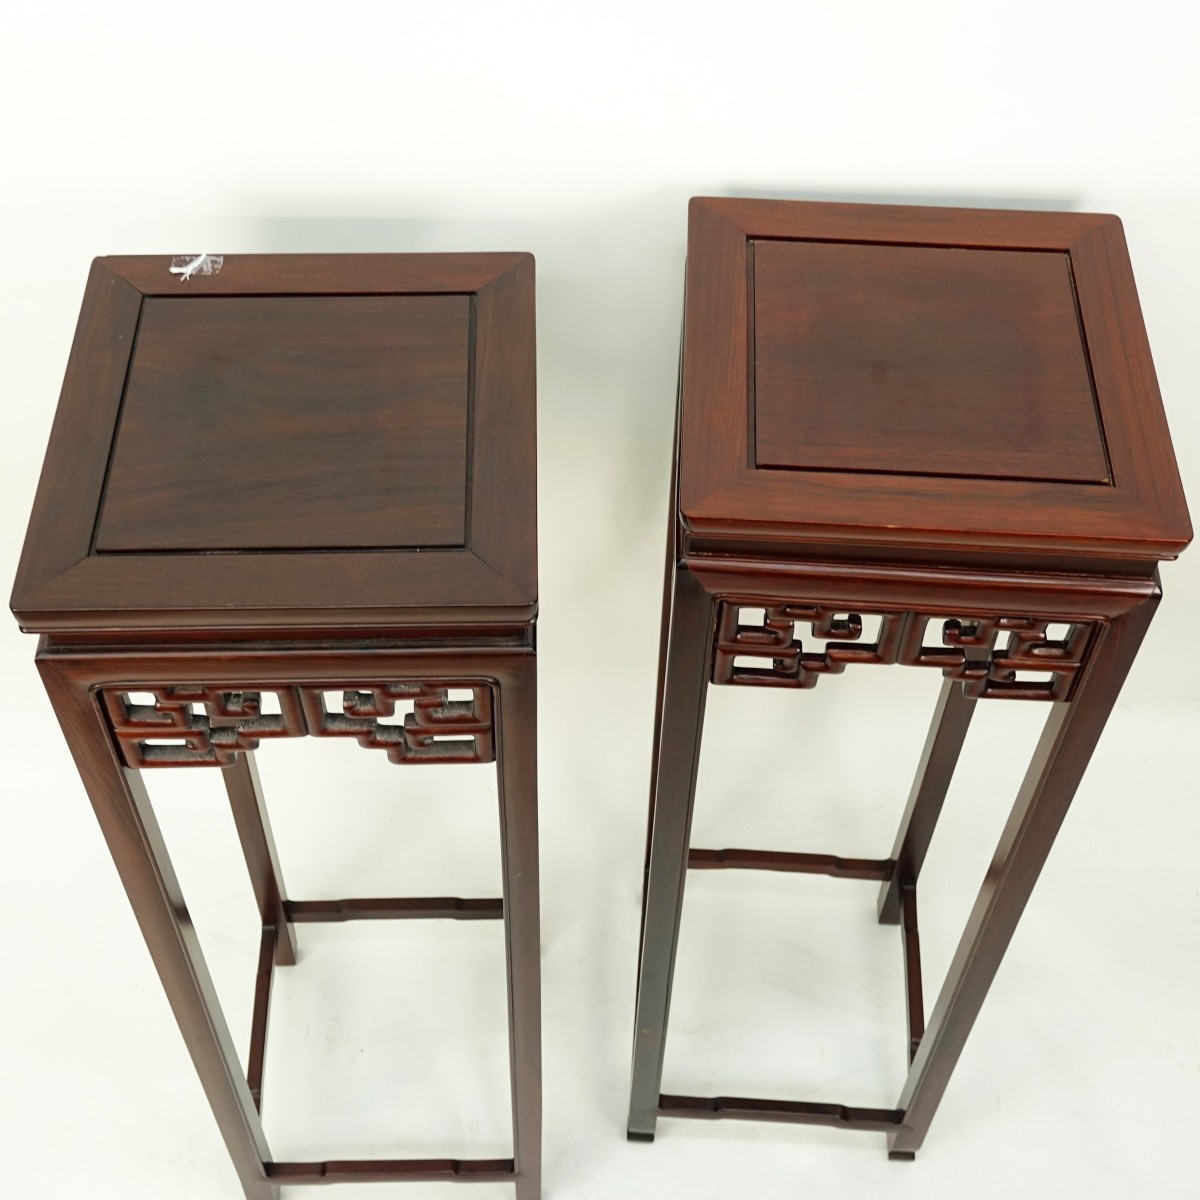 Pair of Chinese Stands